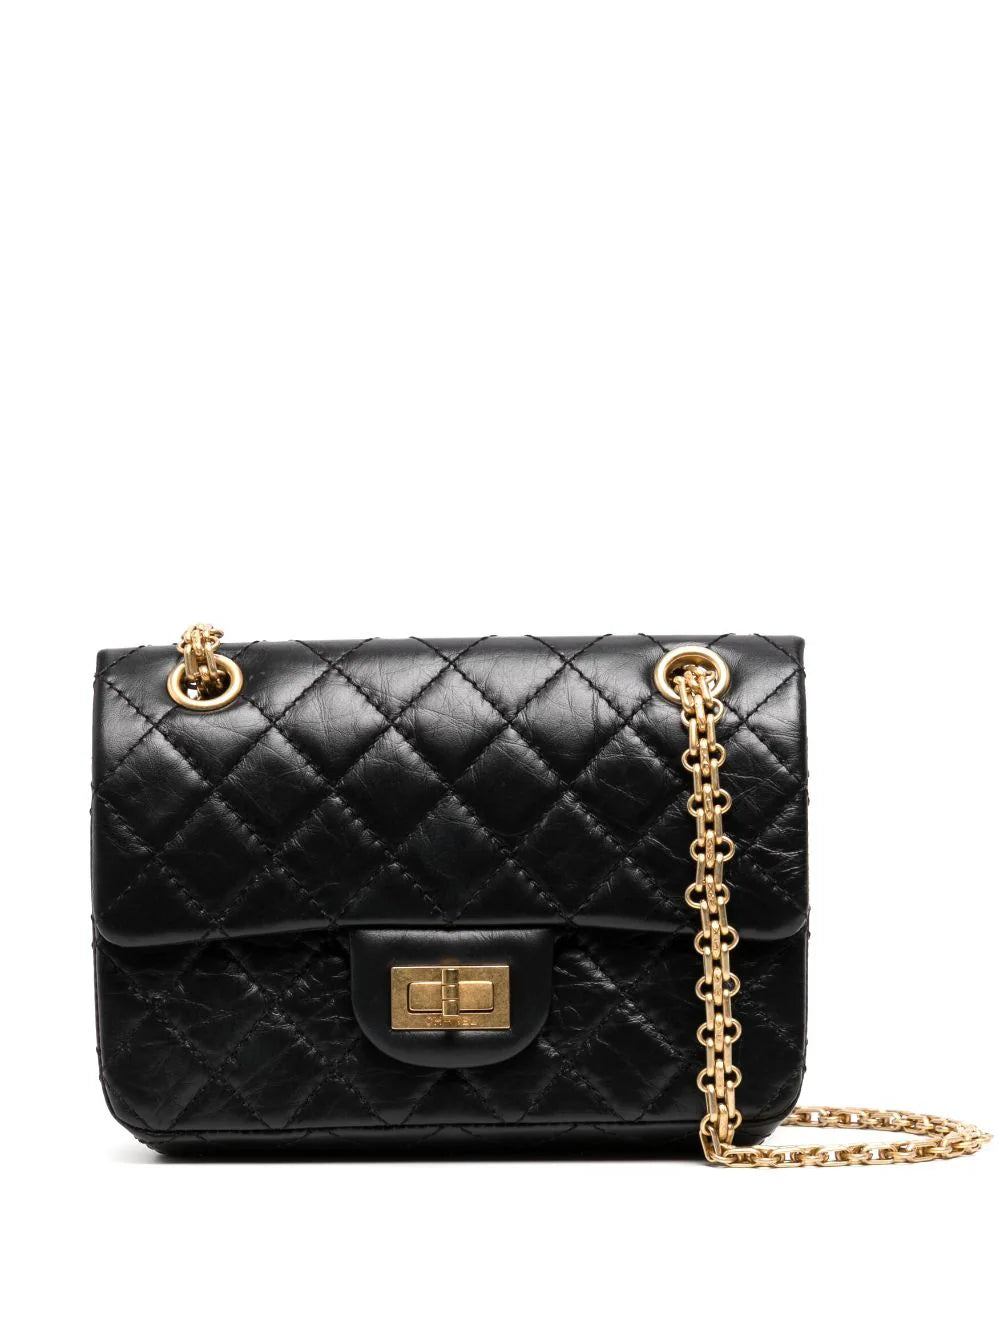 Chanel 2.55 Reissue Double Flap Leather Bag